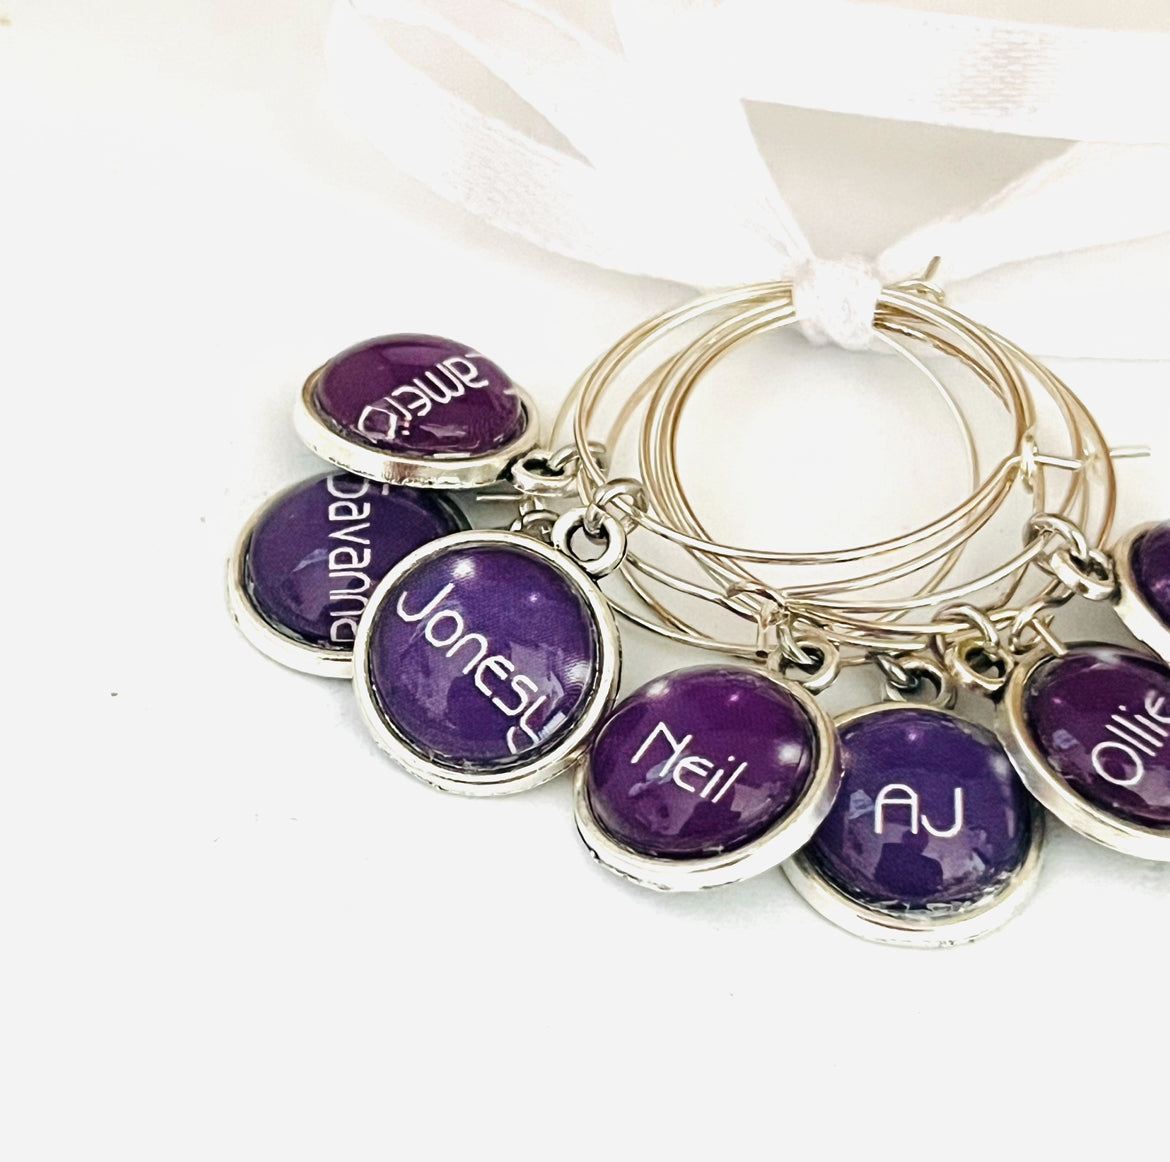 Cloe up of wine glass charms with names on them